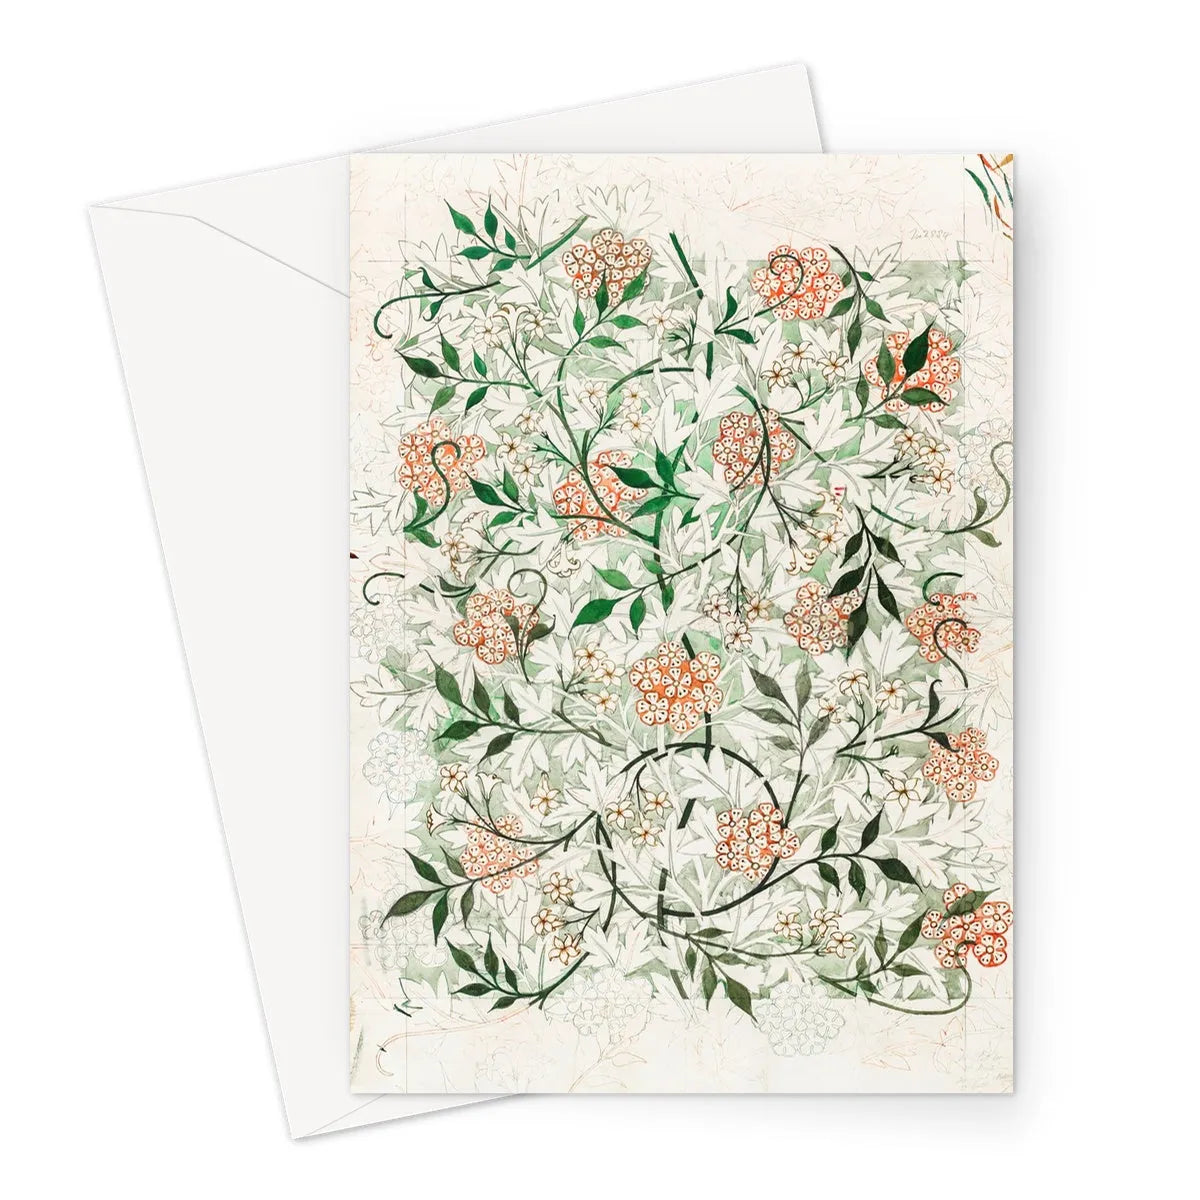 Jasmine - William Morris British Textile Art Greeting Card - A5 Portrait / 1 Card - Greeting & Note Cards - Aesthetic